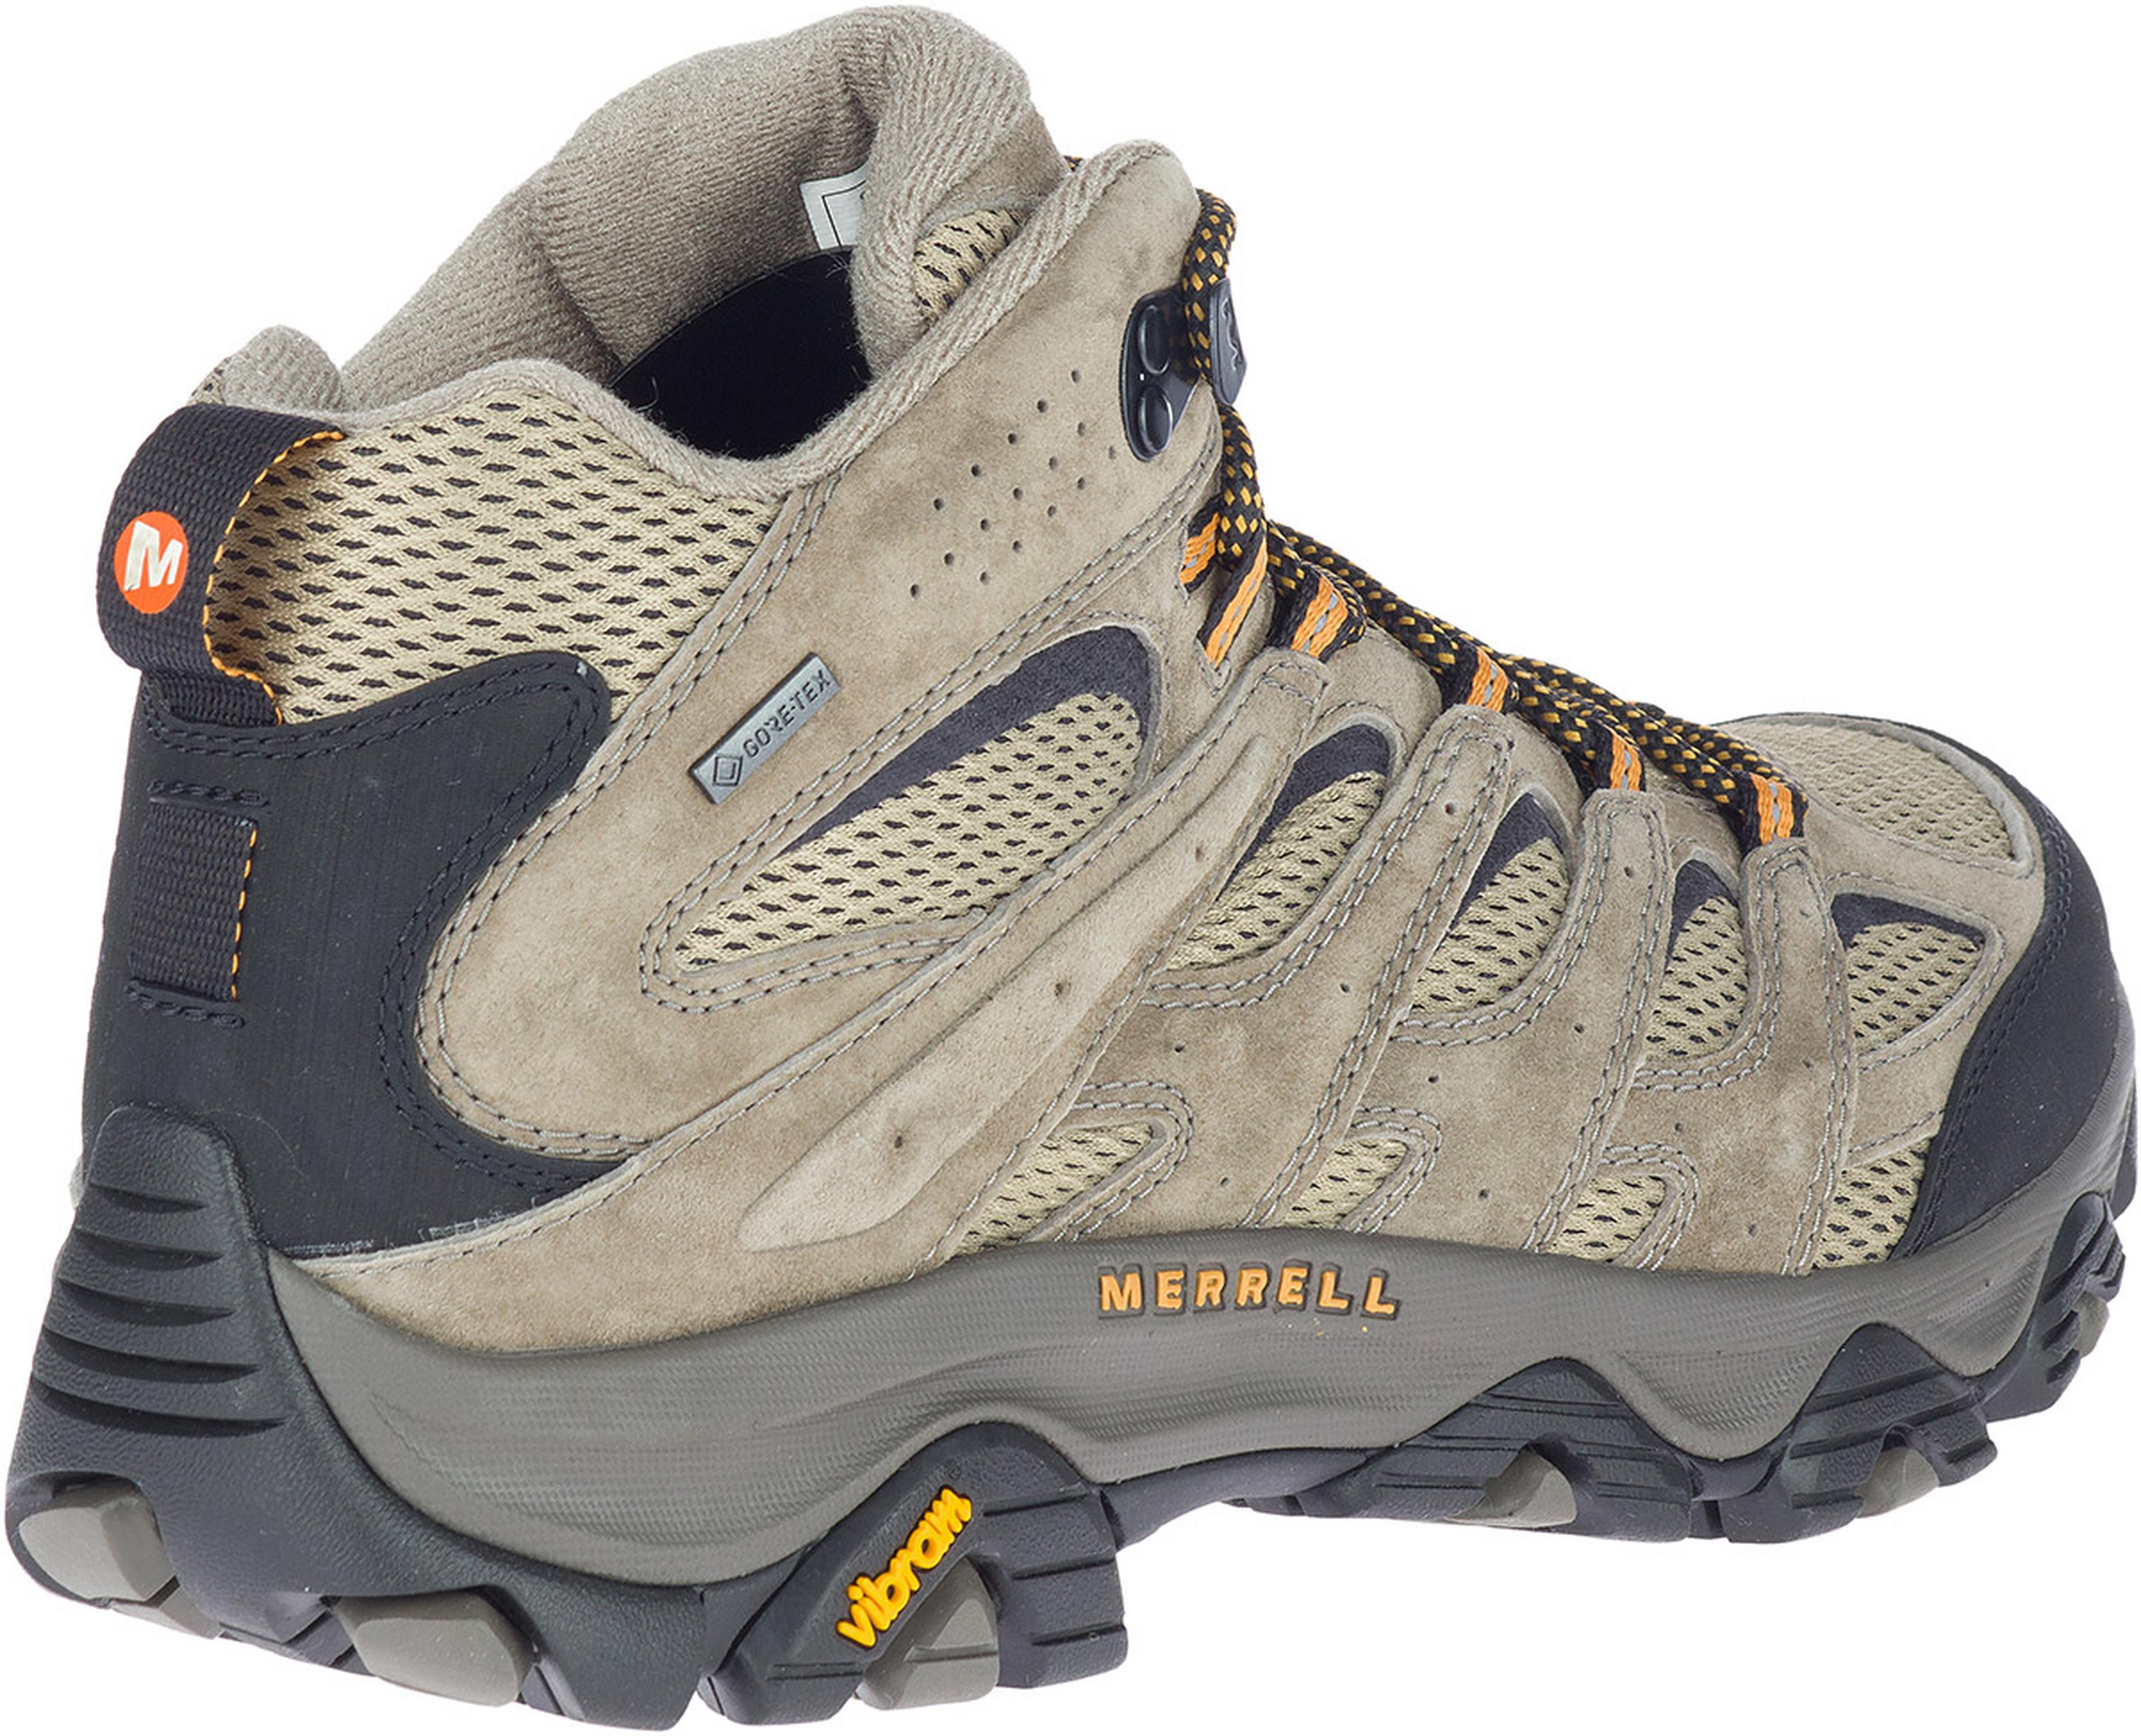 Merrell Moab 3 Mid Gore-Tex Hiking Boots | Wiggle